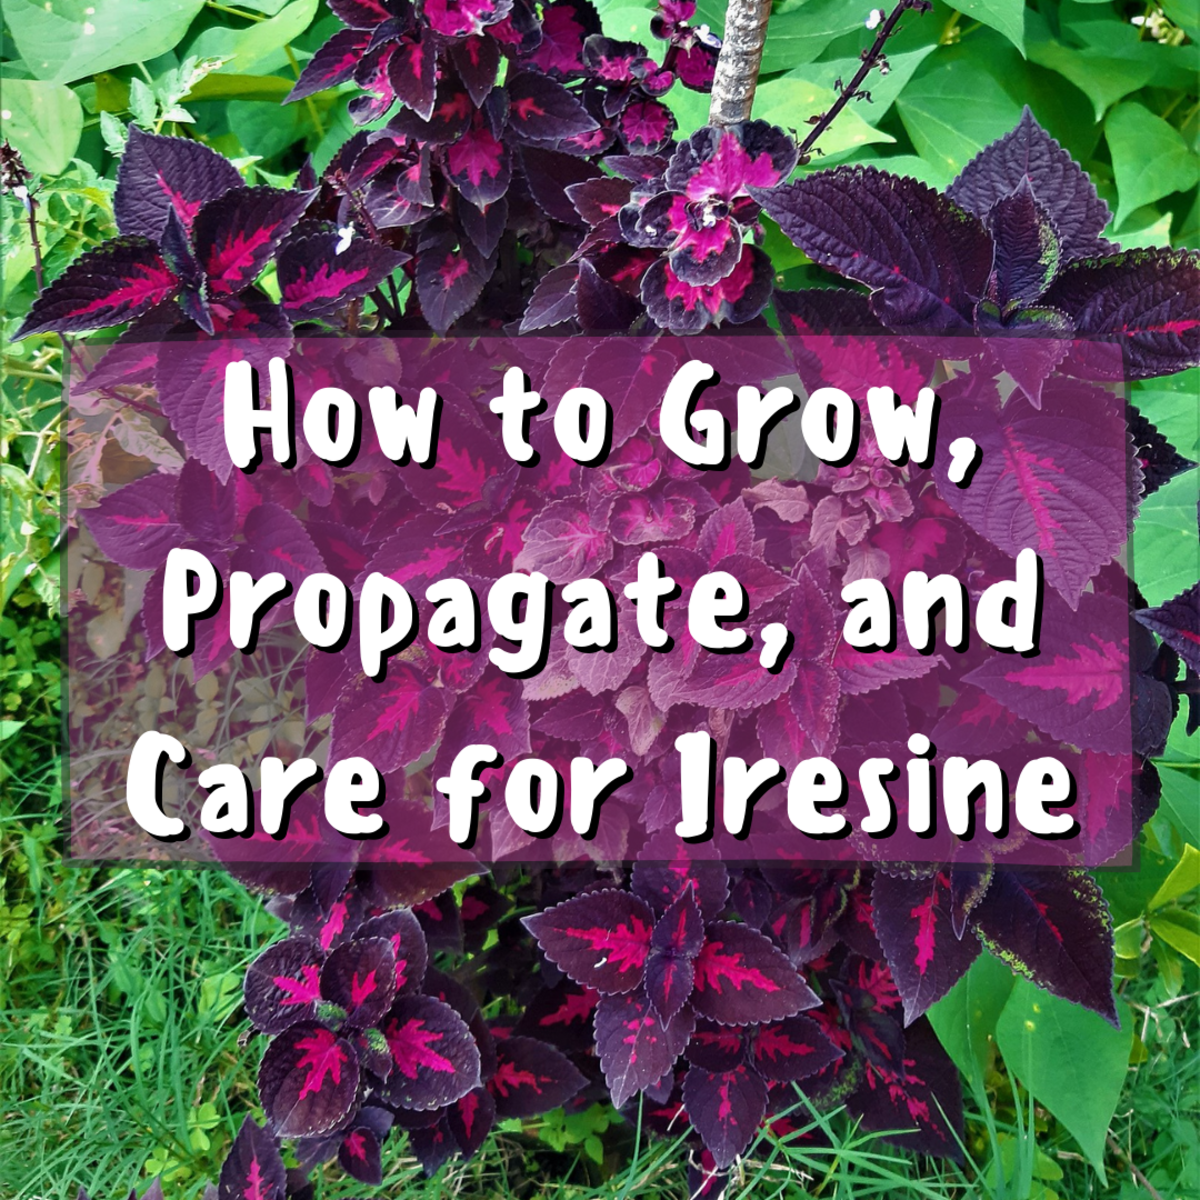 Get the know-how for Iresine propagation, growth, and care. You'll also find a resource for pinching your Iresine and a video tutorial for proper propagation.